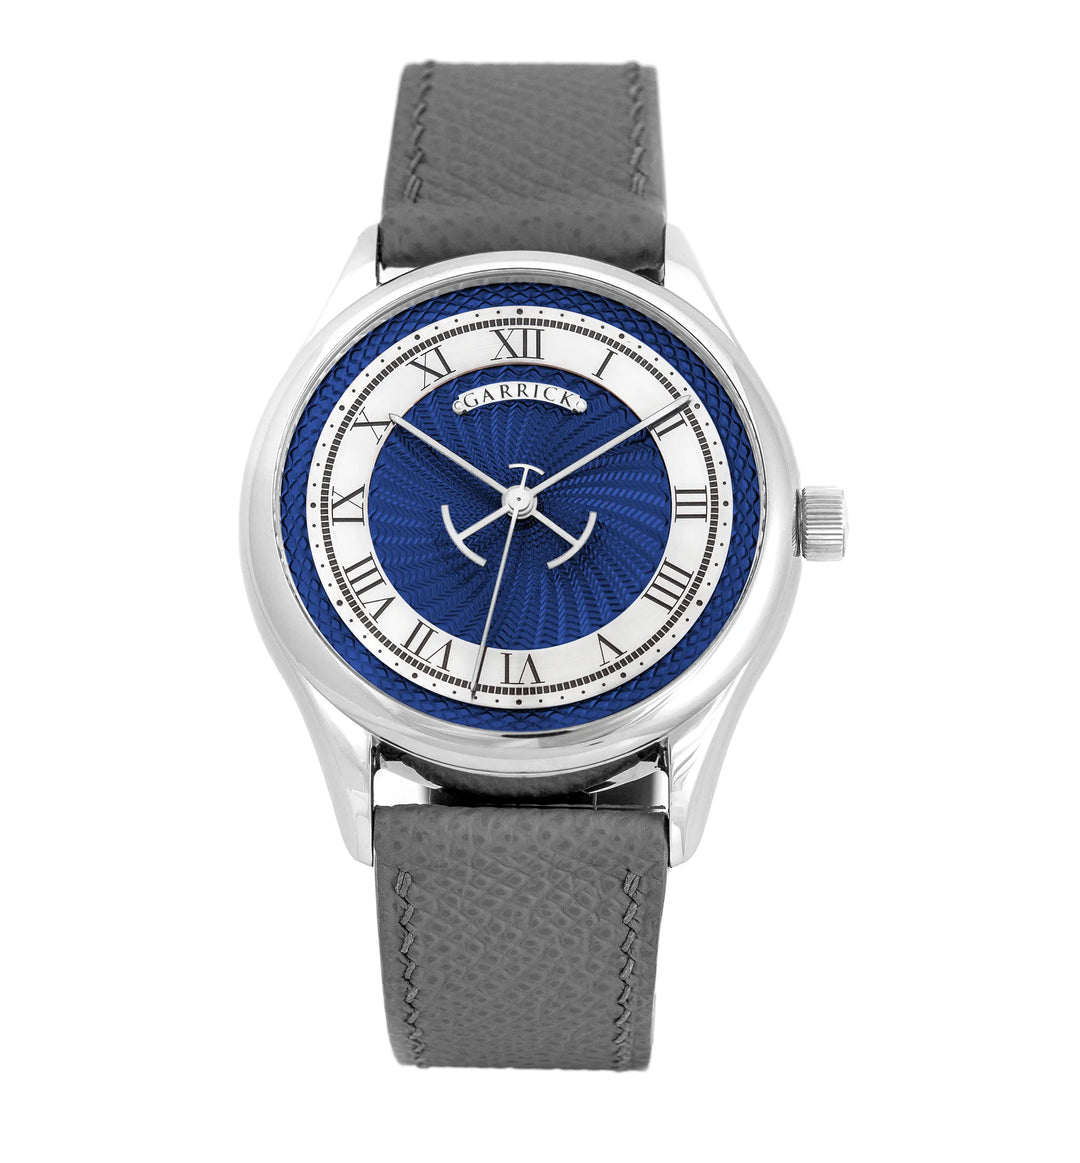 British made S5 watch with blue engine turned dial by Garrick Watchmakers